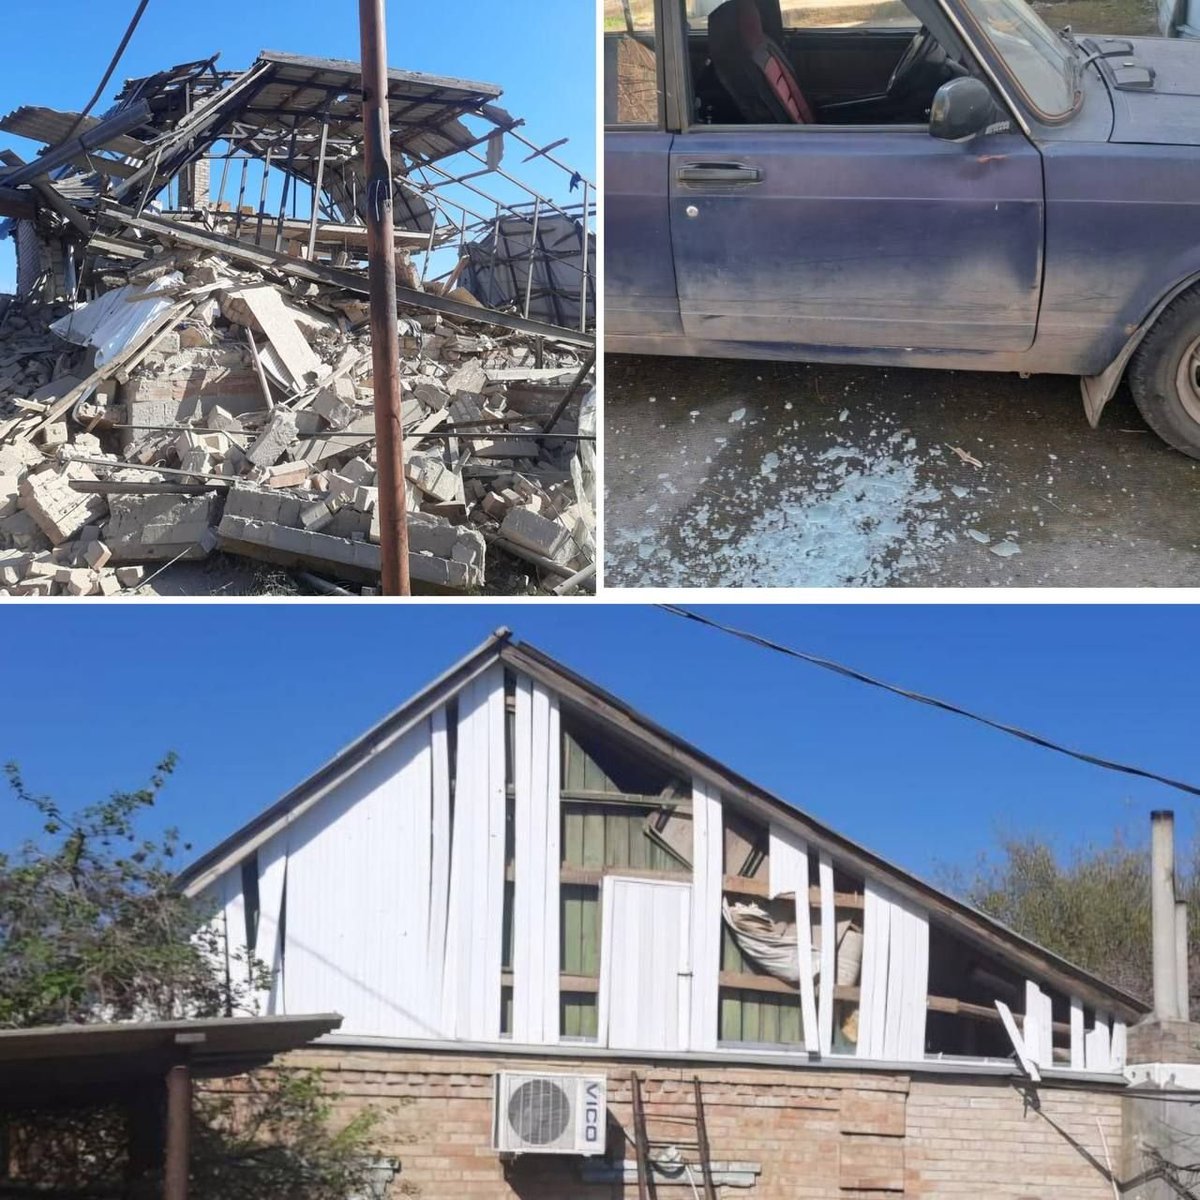 ⚡️ In Nikopol, there are two wounded - a 21-year-old girl and a 49-year-old man. They are in the hospital in a moderate condition.

This was announced by the head of Dnipropetrovsk RMA Serhii Lysak.

A destroyed two-story residential building. There are also damaged private…